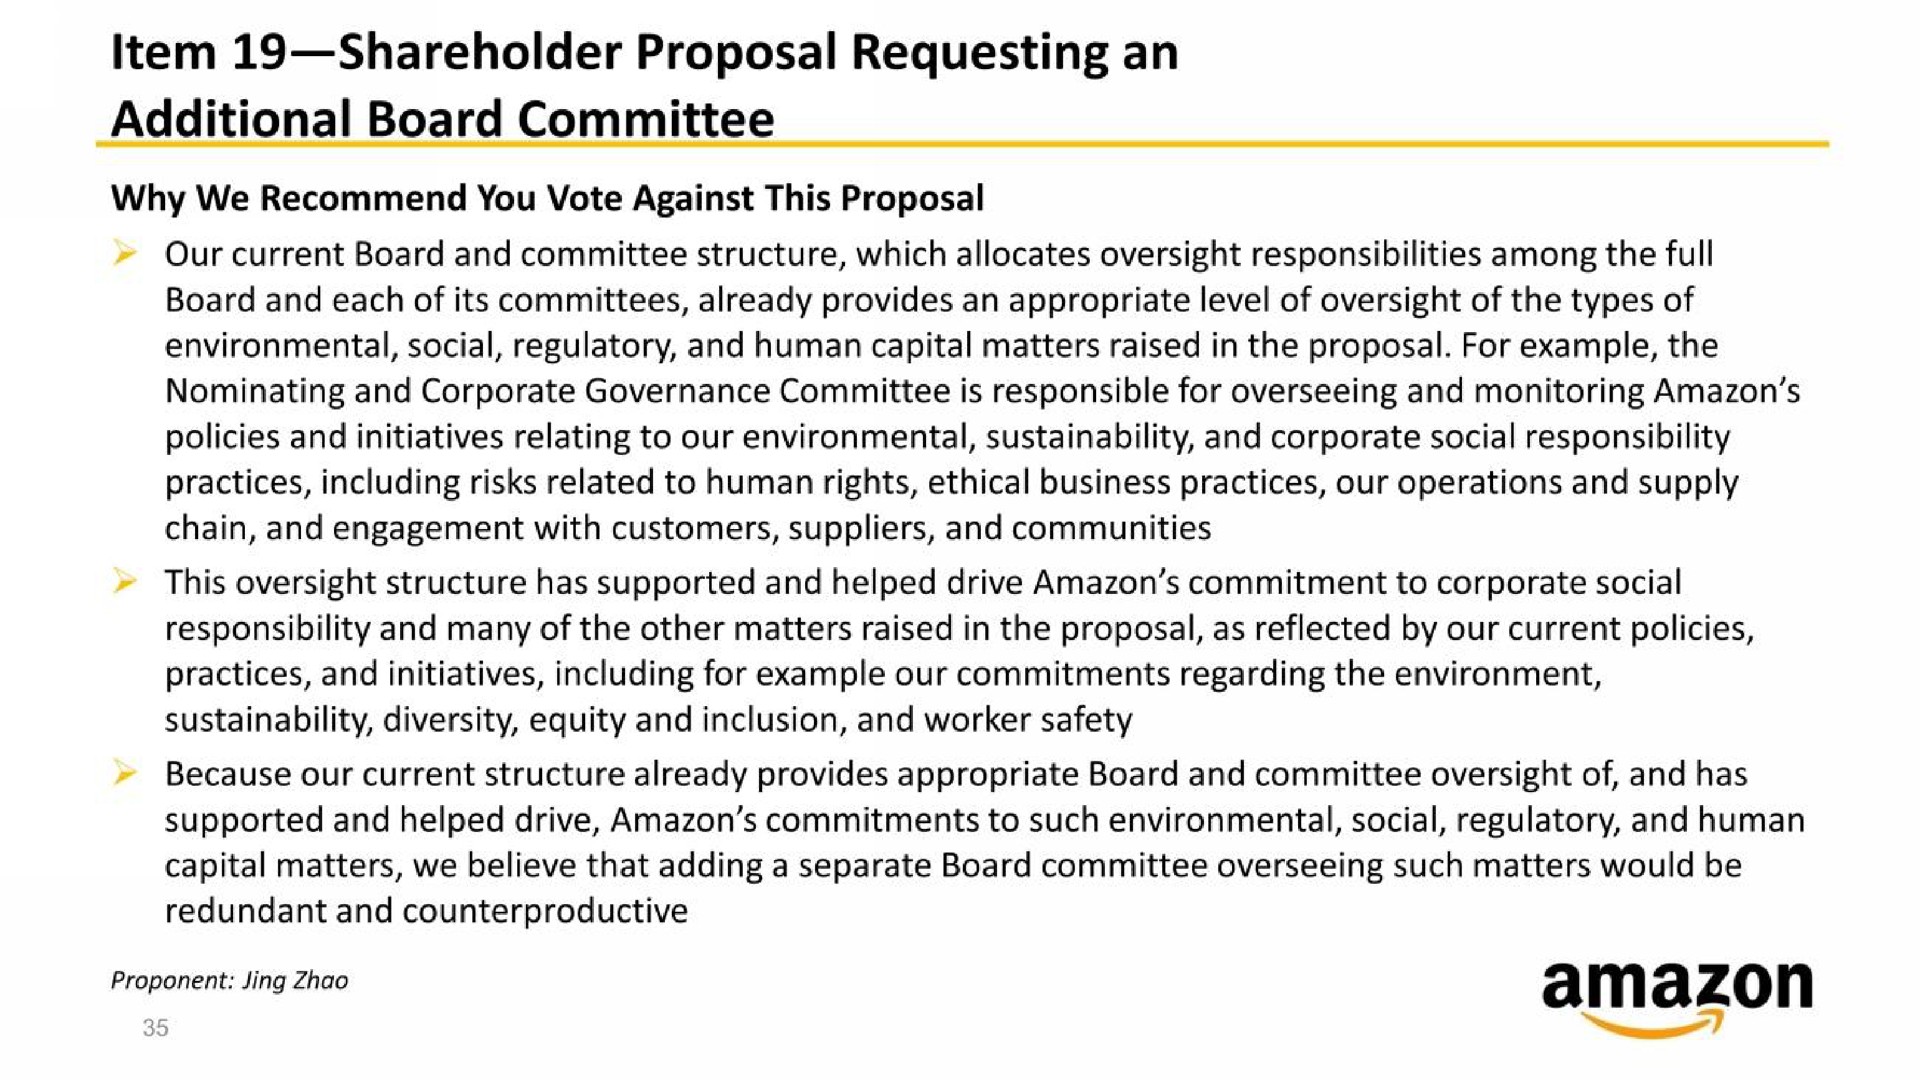 item shareholder proposal requesting an additional board committee | Amazon